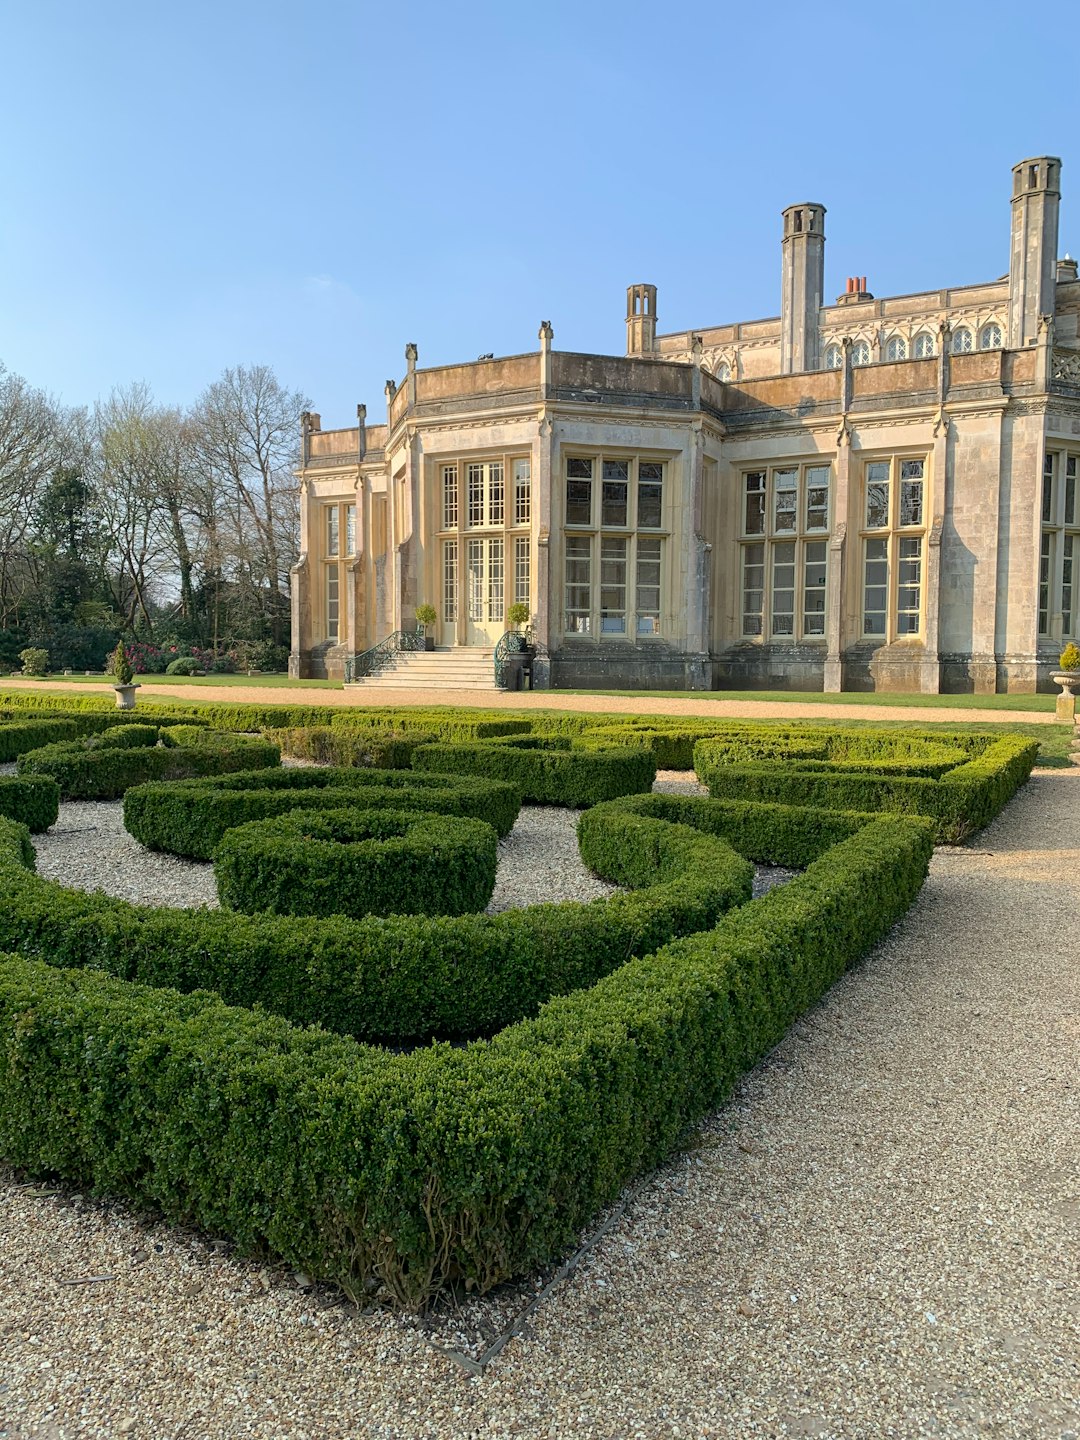 Travel Tips and Stories of Highcliffe Castle in United Kingdom